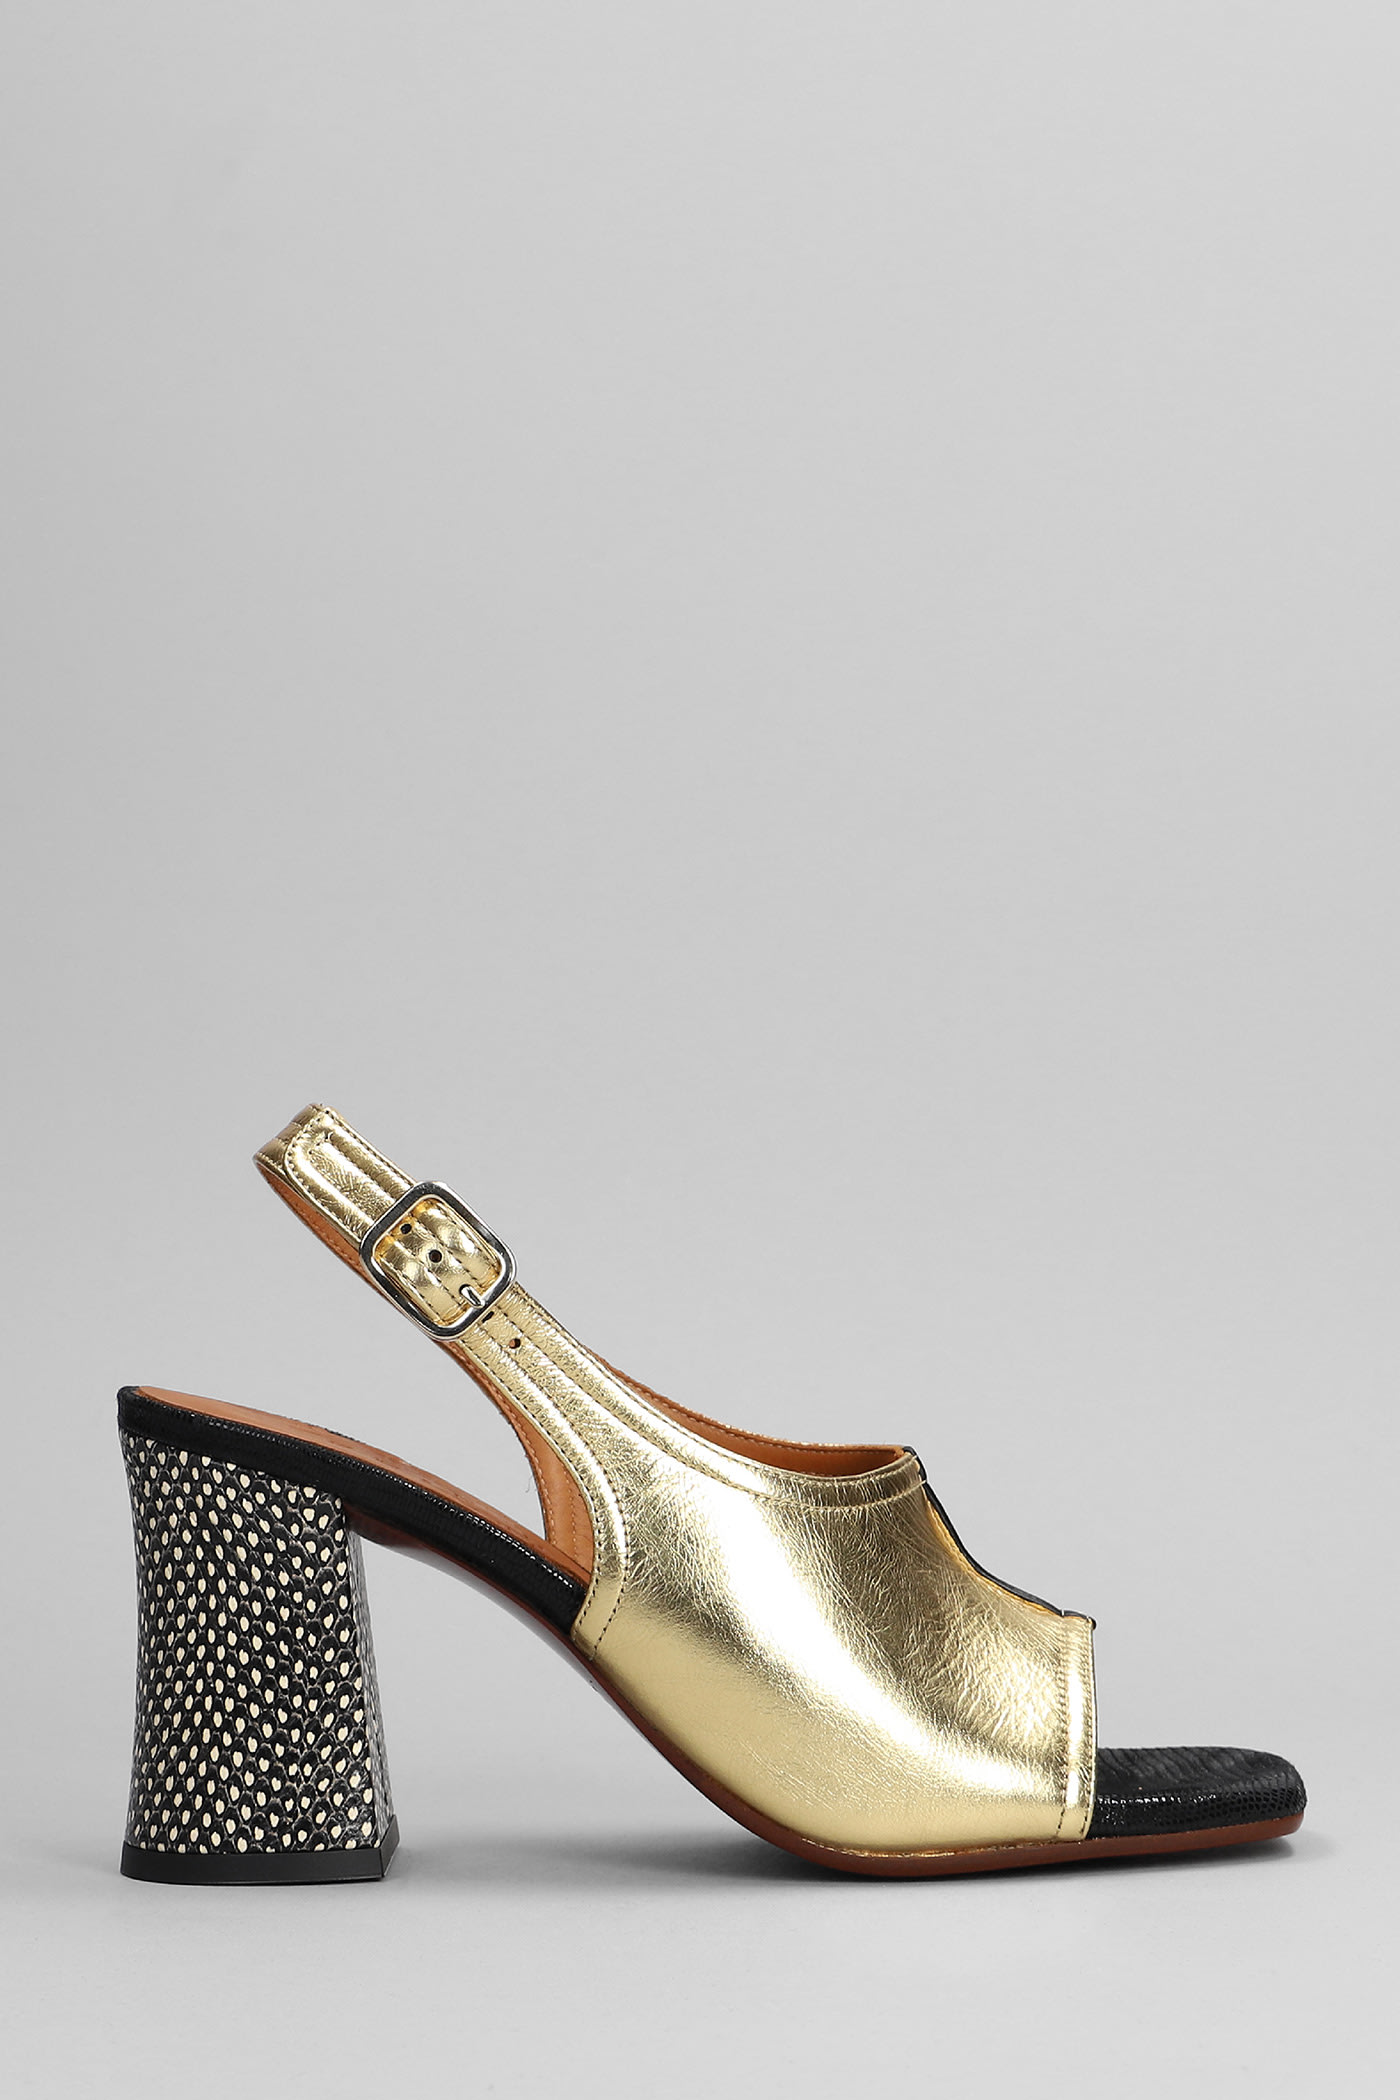 Chie Mihara Pendal Sandals In Gold Leather